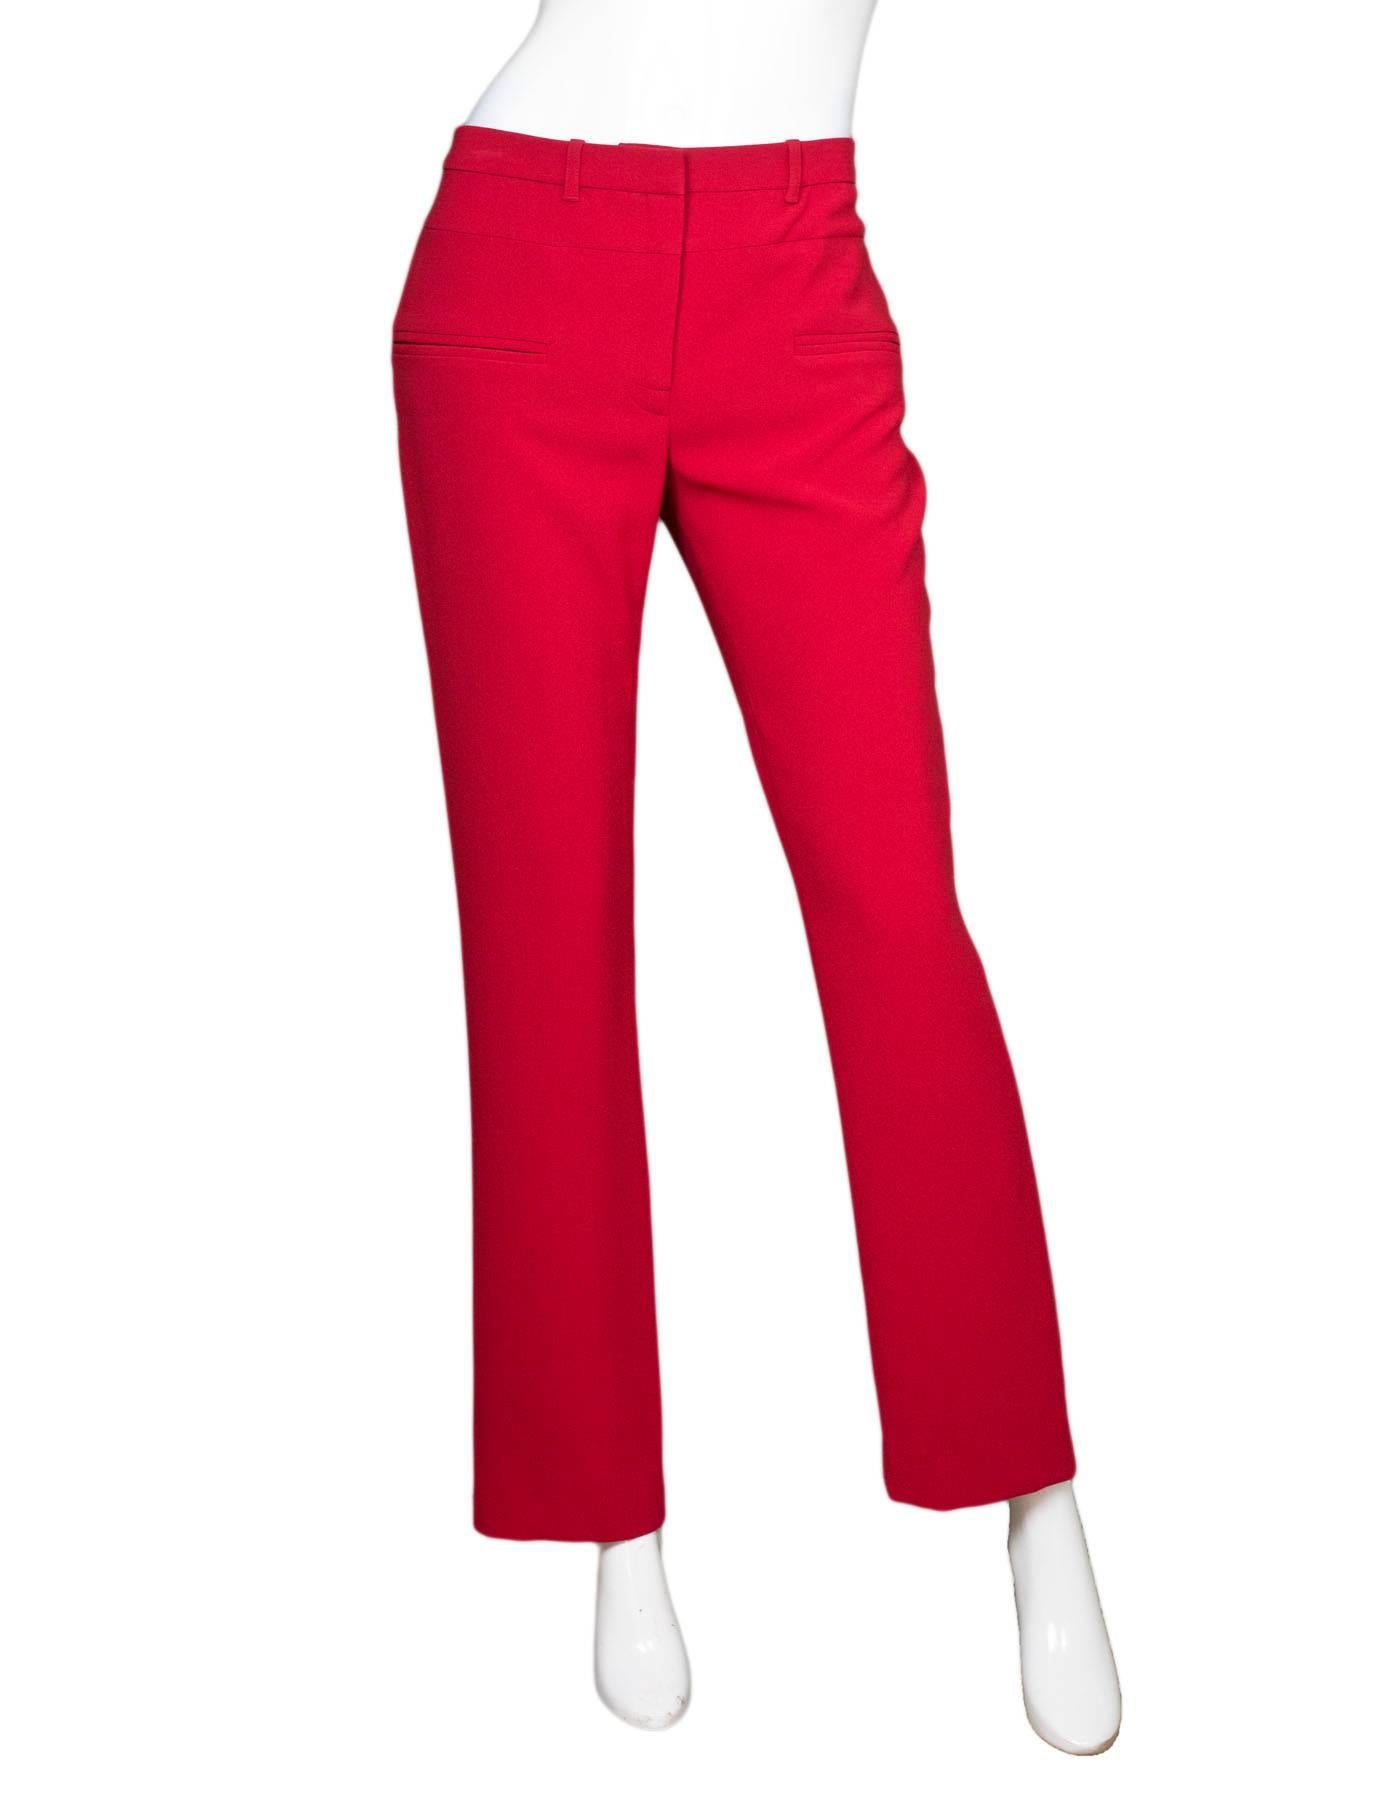 Altuzarra Red Pants Sz IT38

Made In: Italy
Color: Red
Closure/Opening: Zip fly and button closure
Exterior Pockets: Faux hip pockets
Composition: 69% Tri-acetate, 31% Polyester
Interior Pockets: None
Retail Price: $550 + tax
Overall Condition: